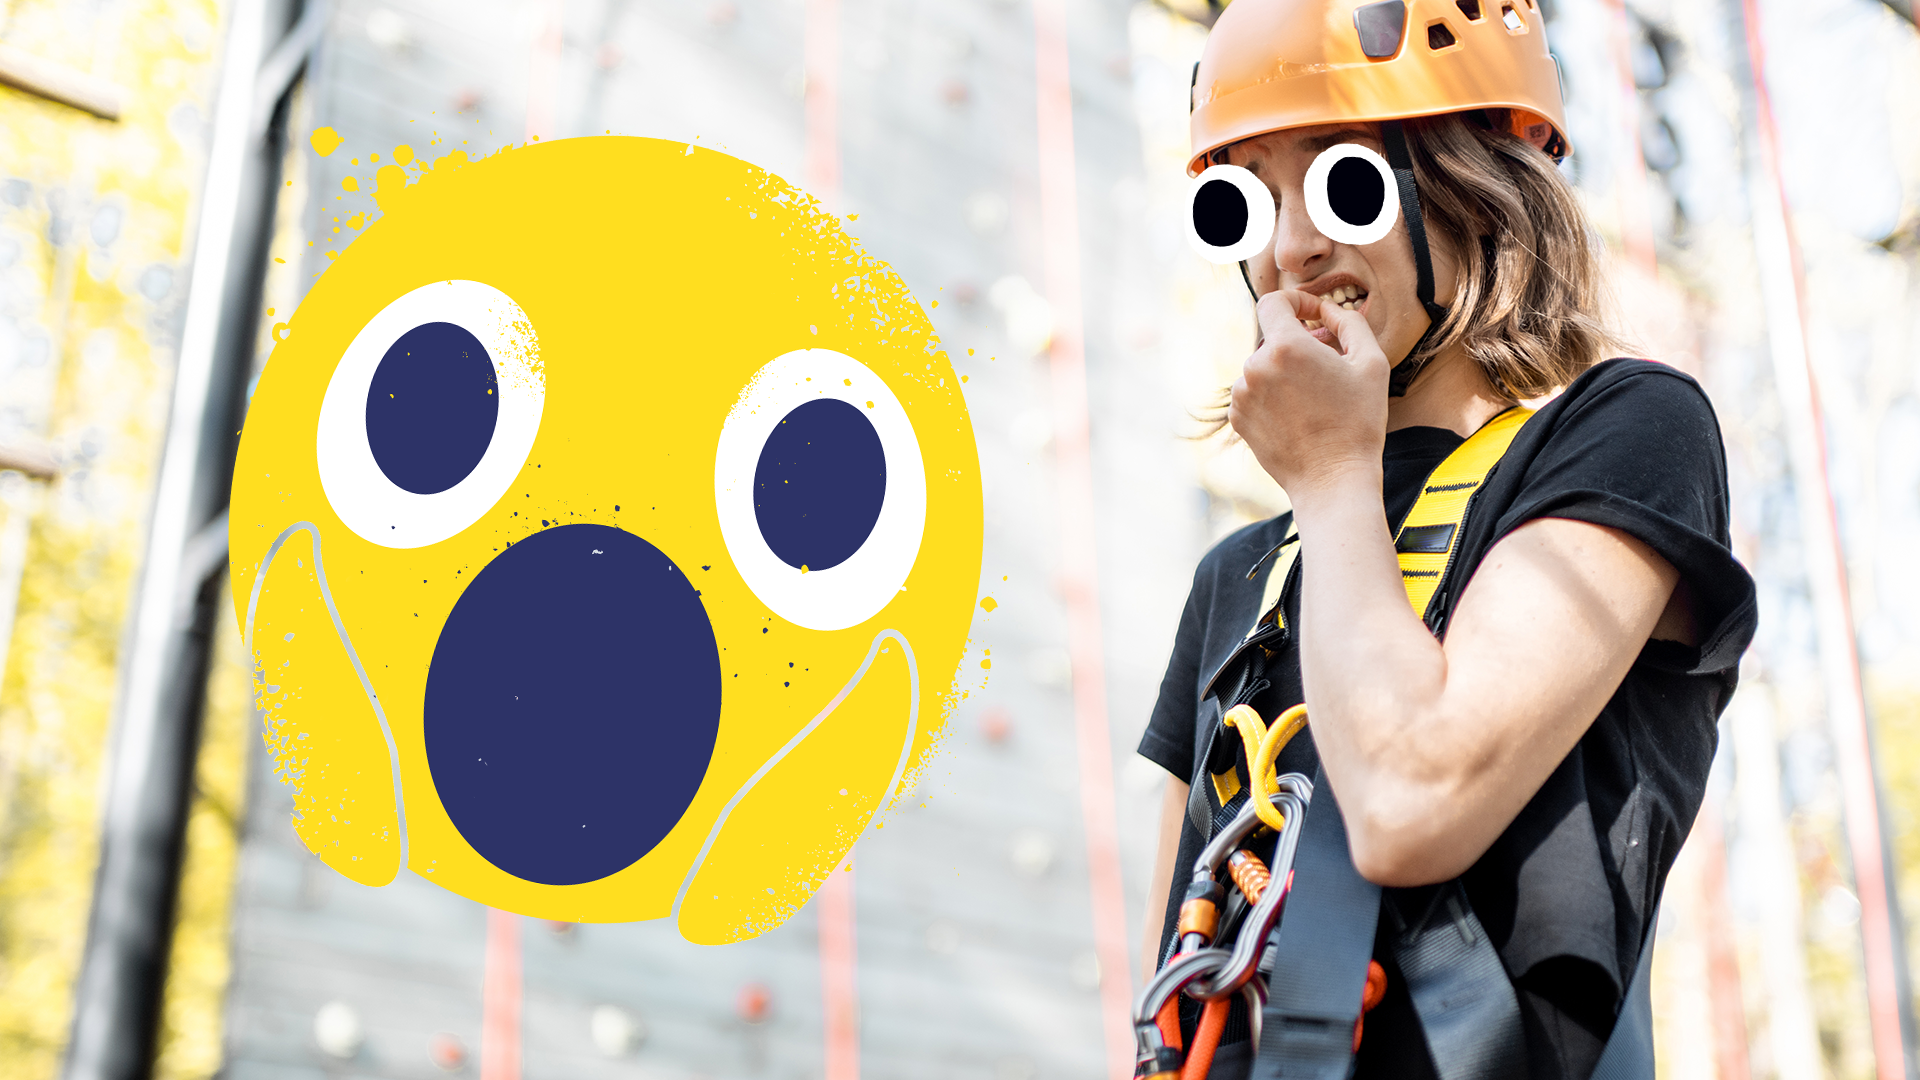 Woman in front of a climbing wall and scared emoji